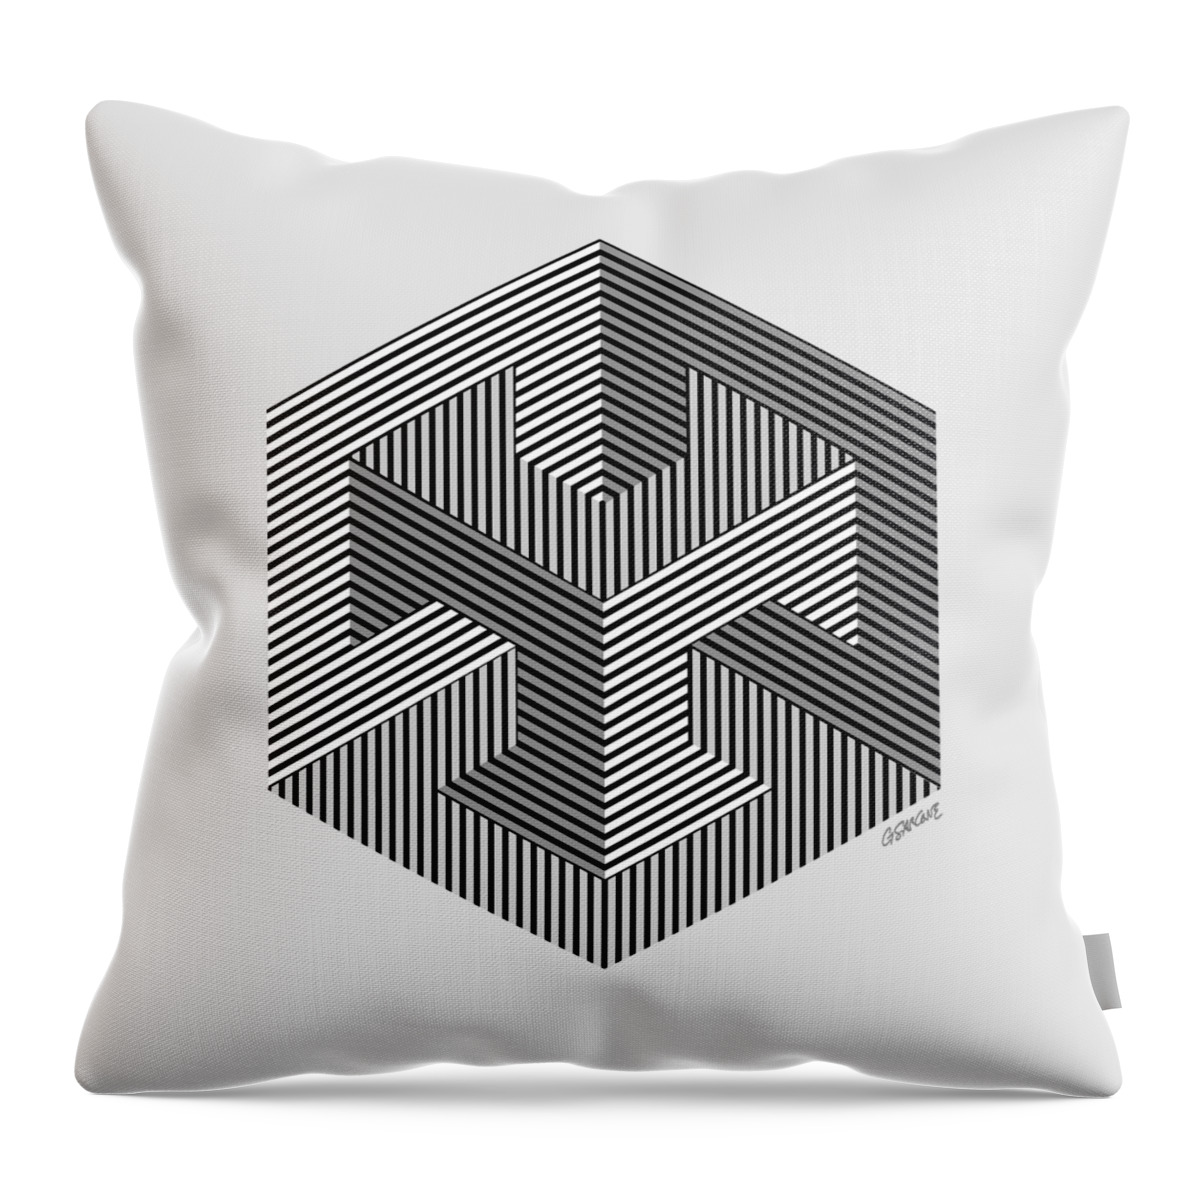 Optical Art Throw Pillow featuring the mixed media Enigma 2 by Gianni Sarcone